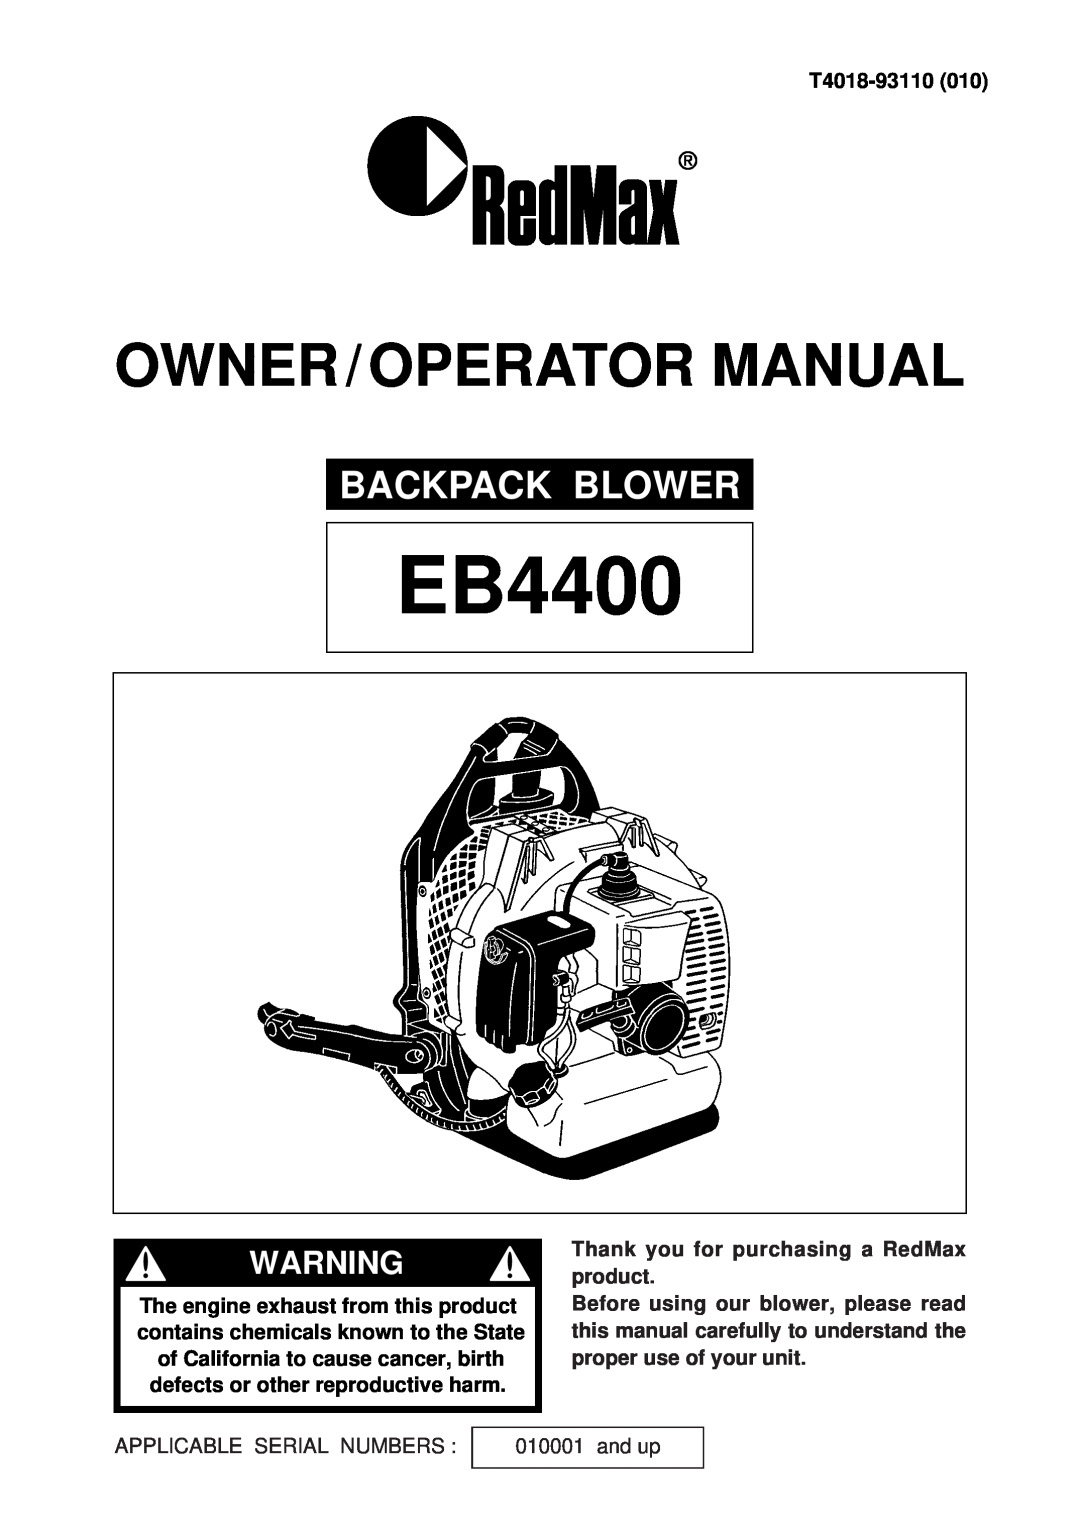 RedMax EB4400 manual Backpack Blower, Owner / Operator Manual, T4018-93110, Thank you for purchasing a RedMax product 